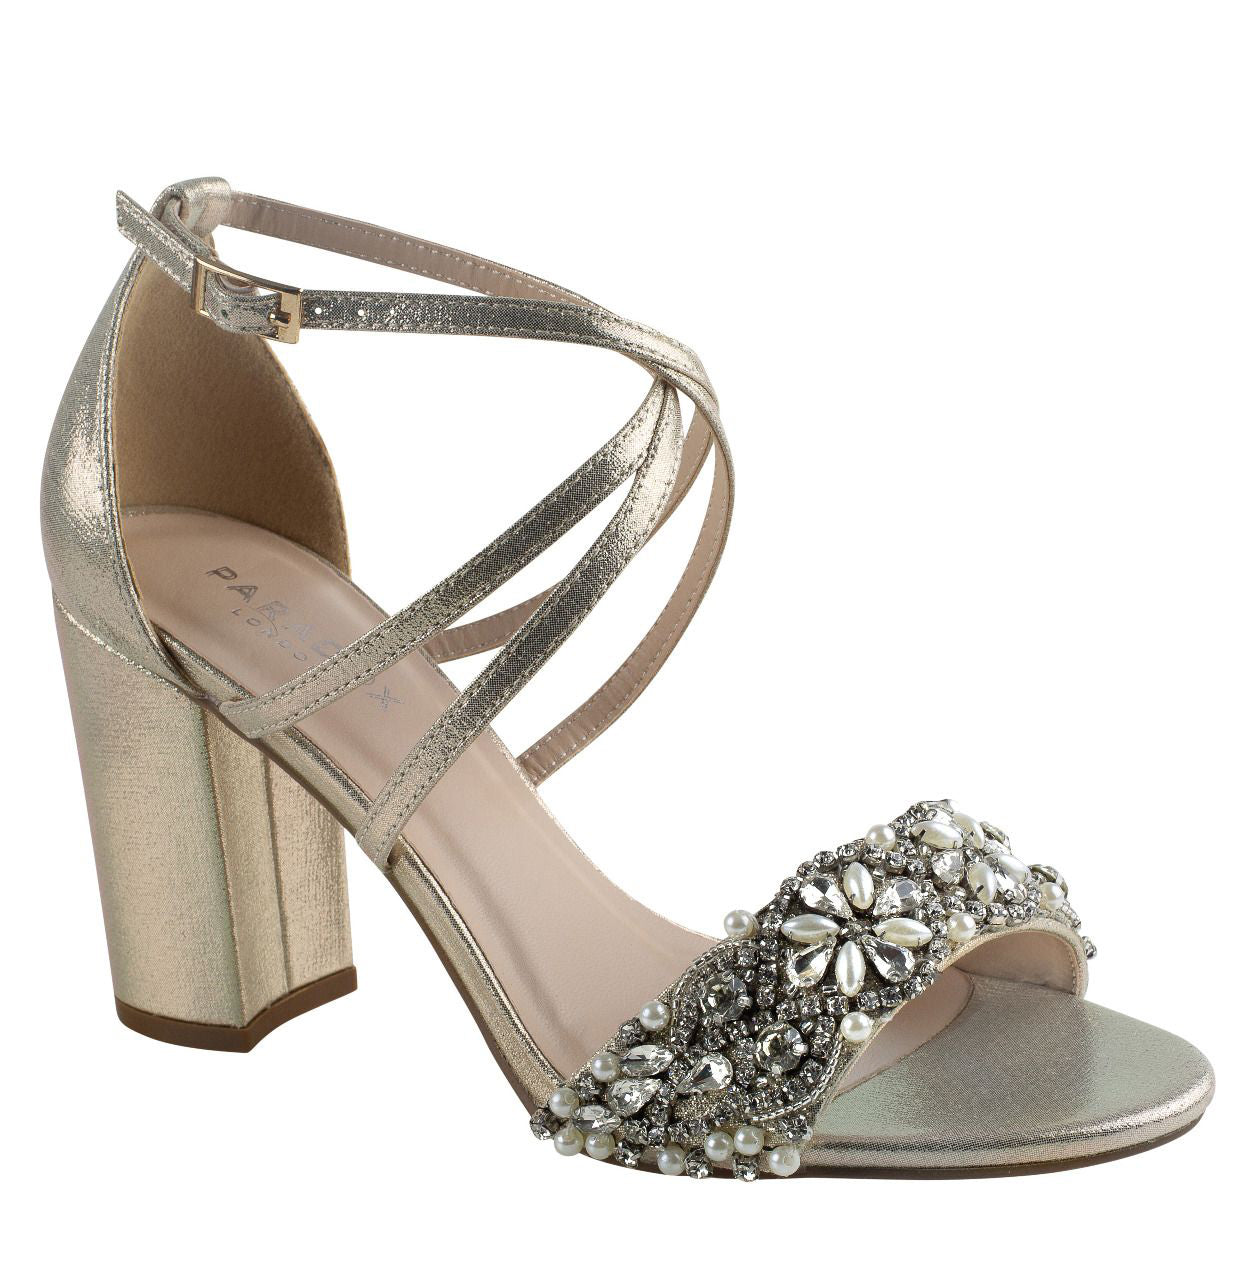 Ivory Sandal with 2.75 inch block heel and decrotive strap